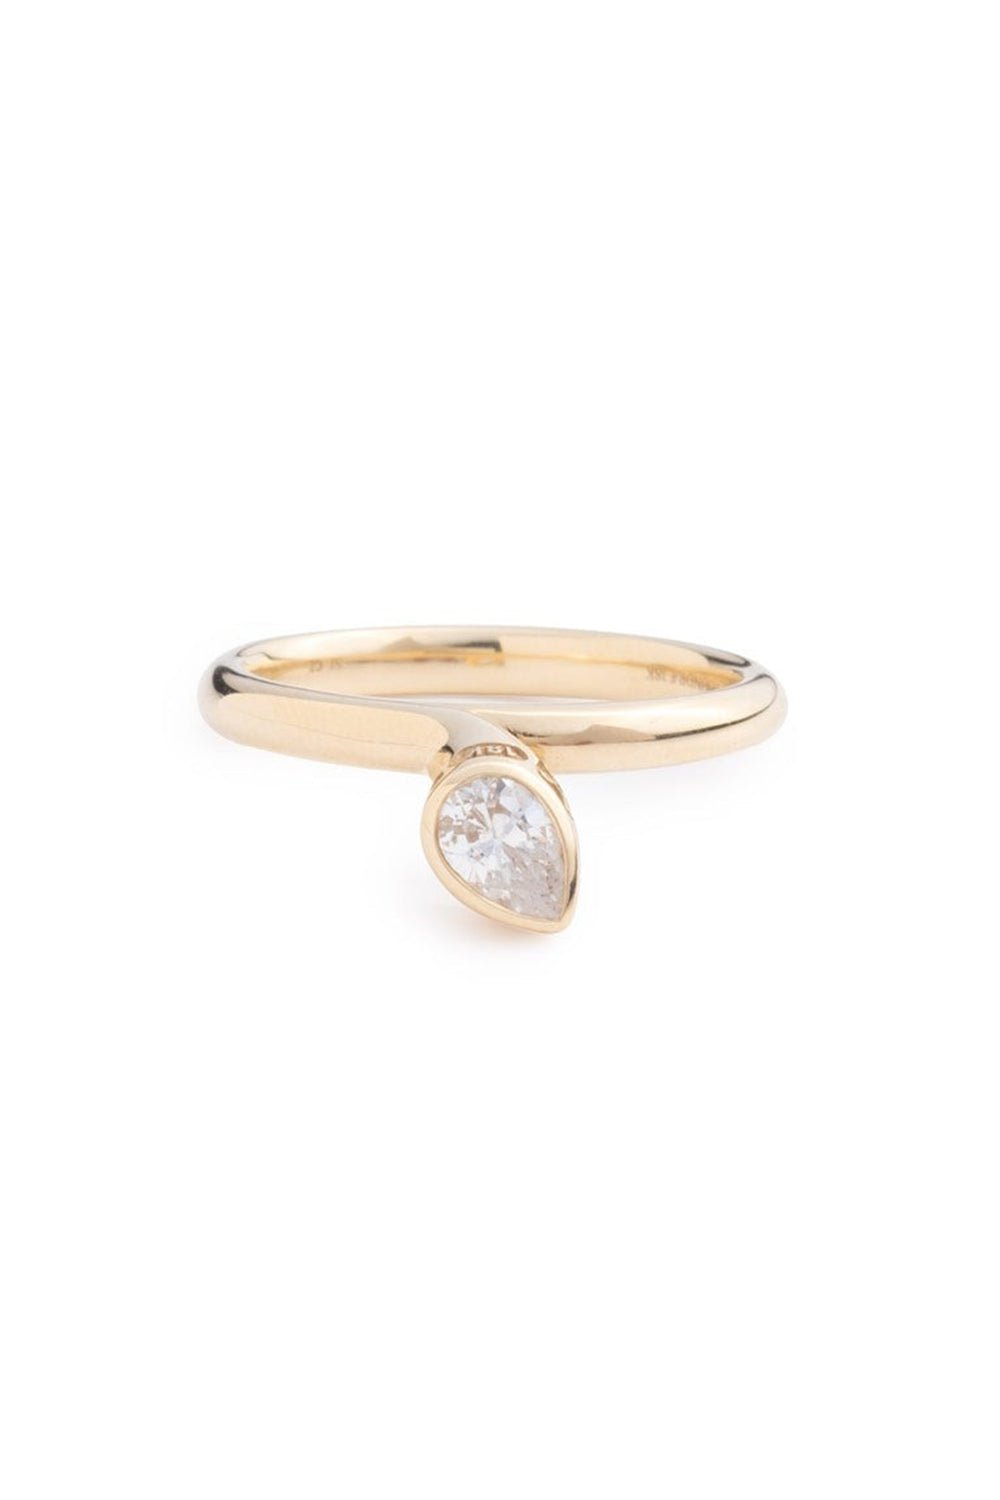 FOUNDRAE-Forever And Always a Pair - Love Diamond Bookend Ring-YELLOW GOLD